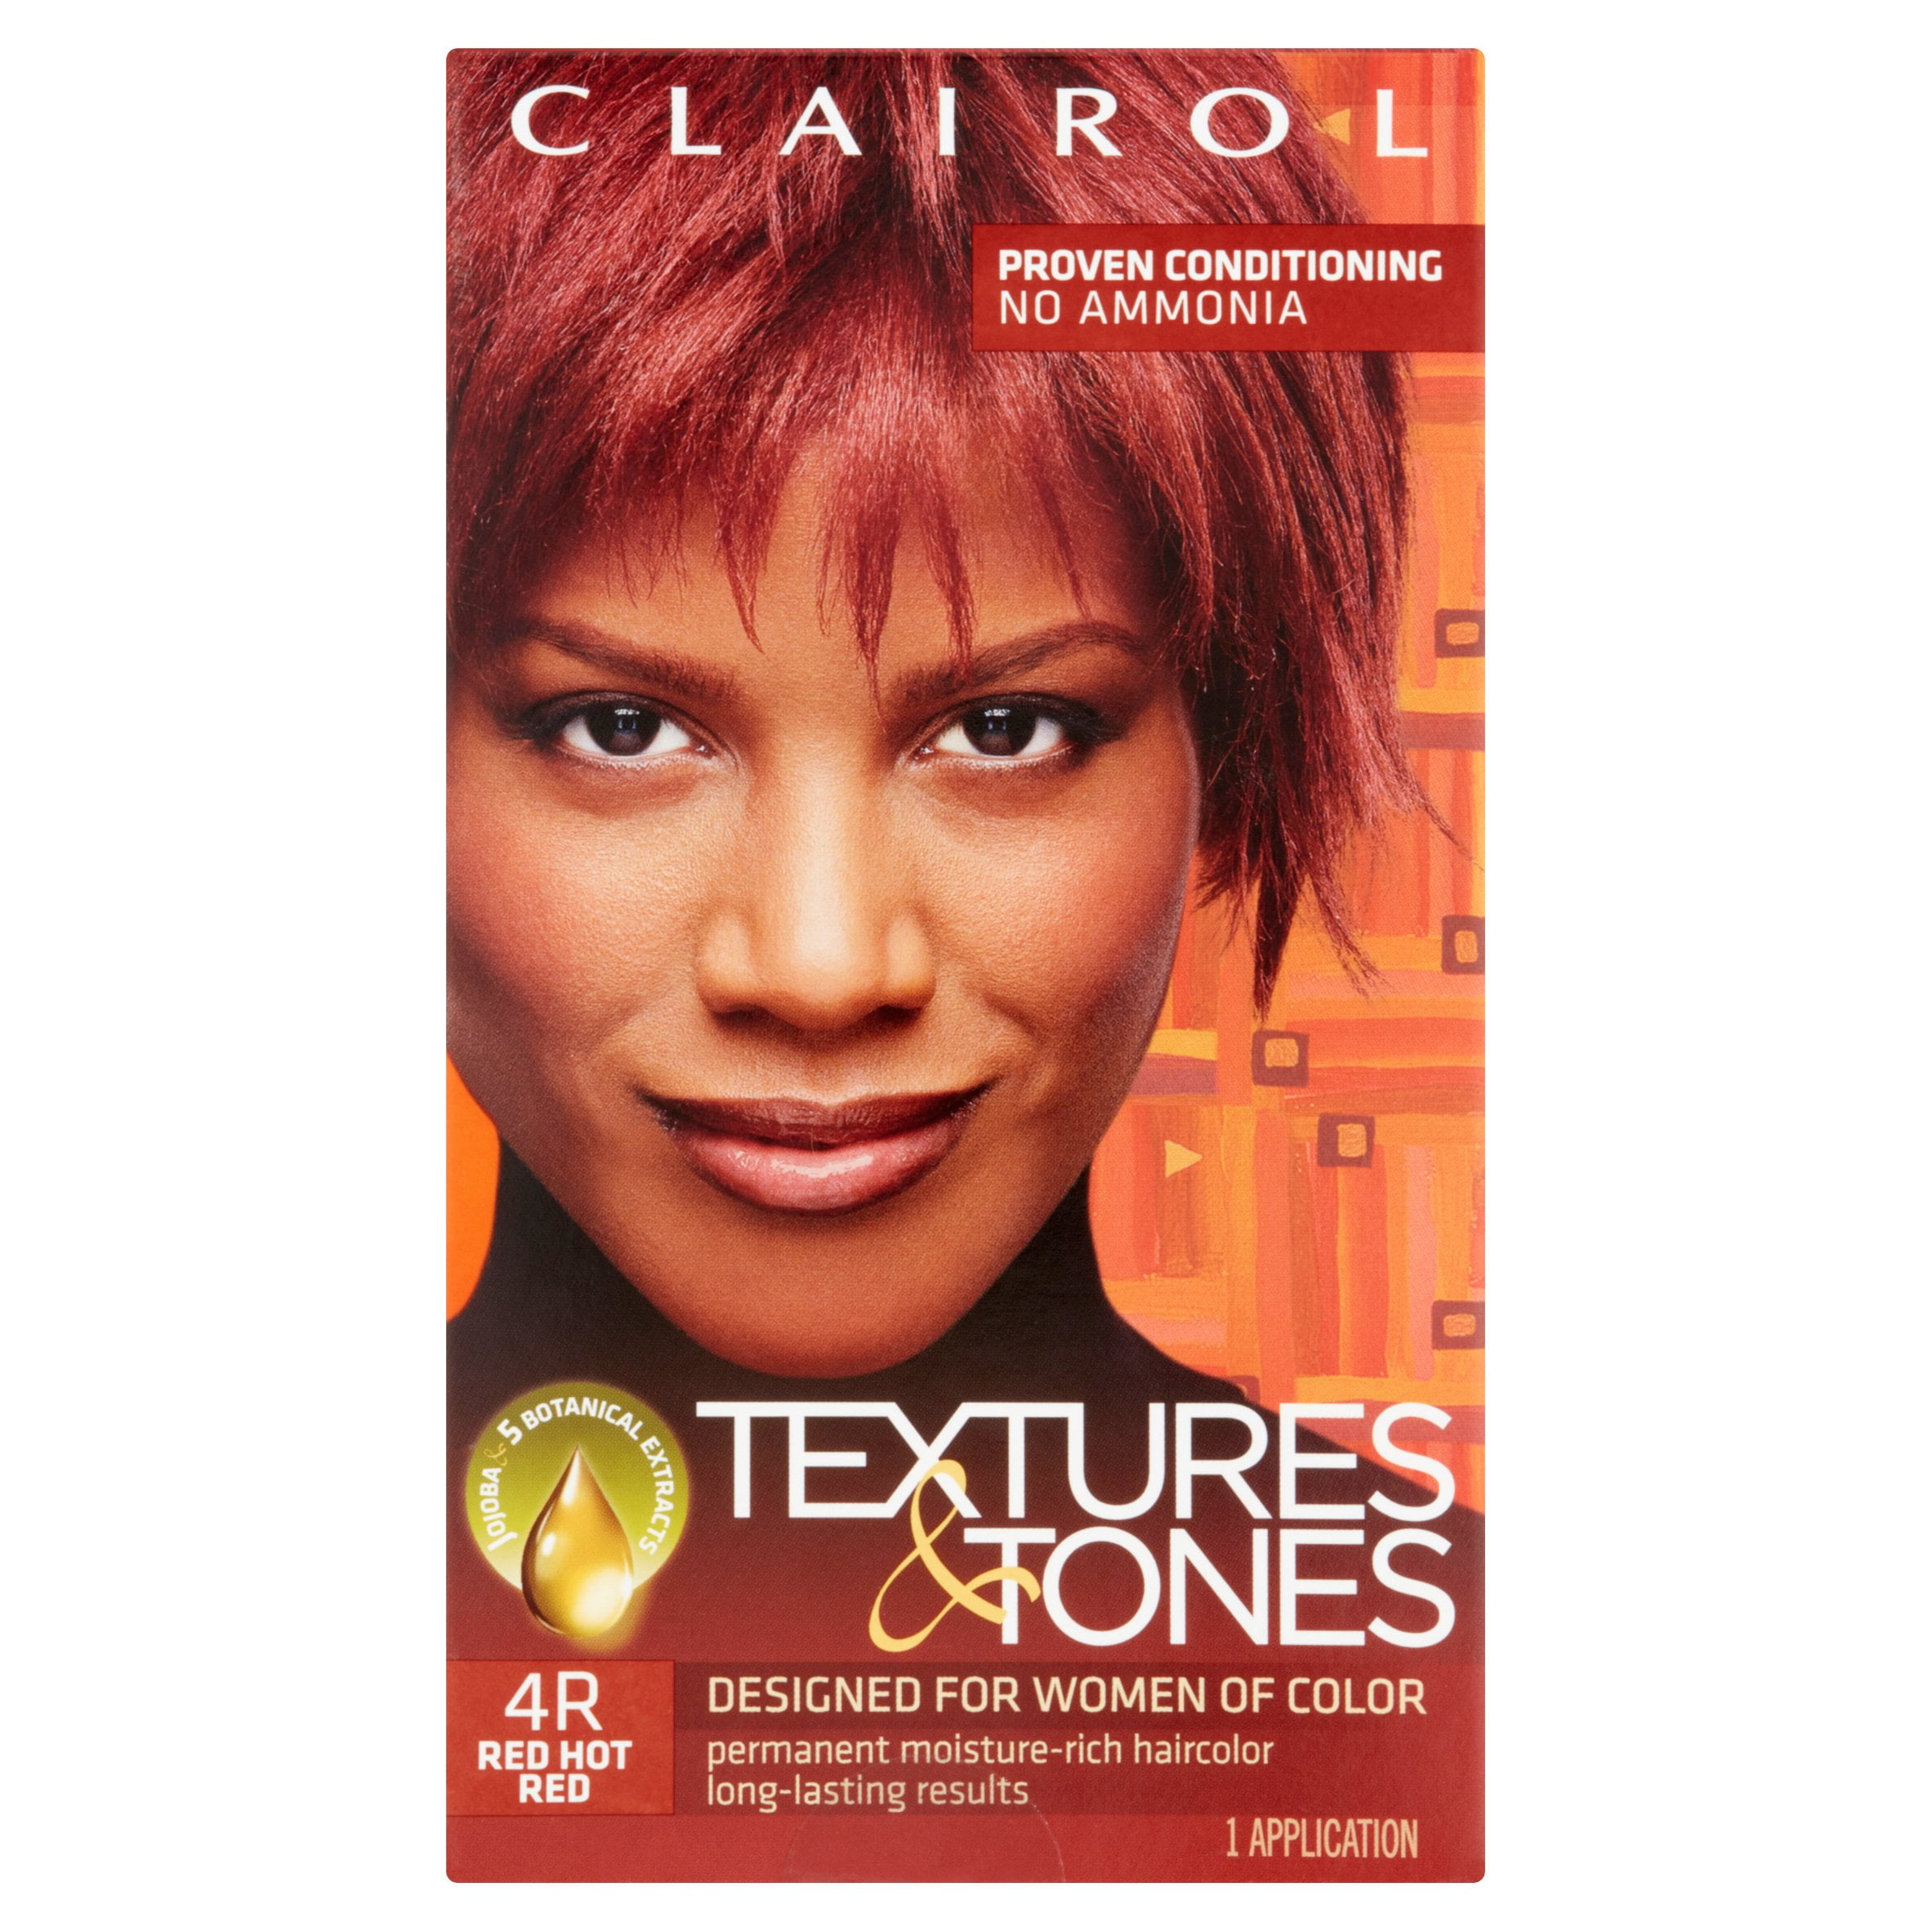 Clairol Professional Textures and Tones Hair Color, Red Hot Red, 1 Kit -  